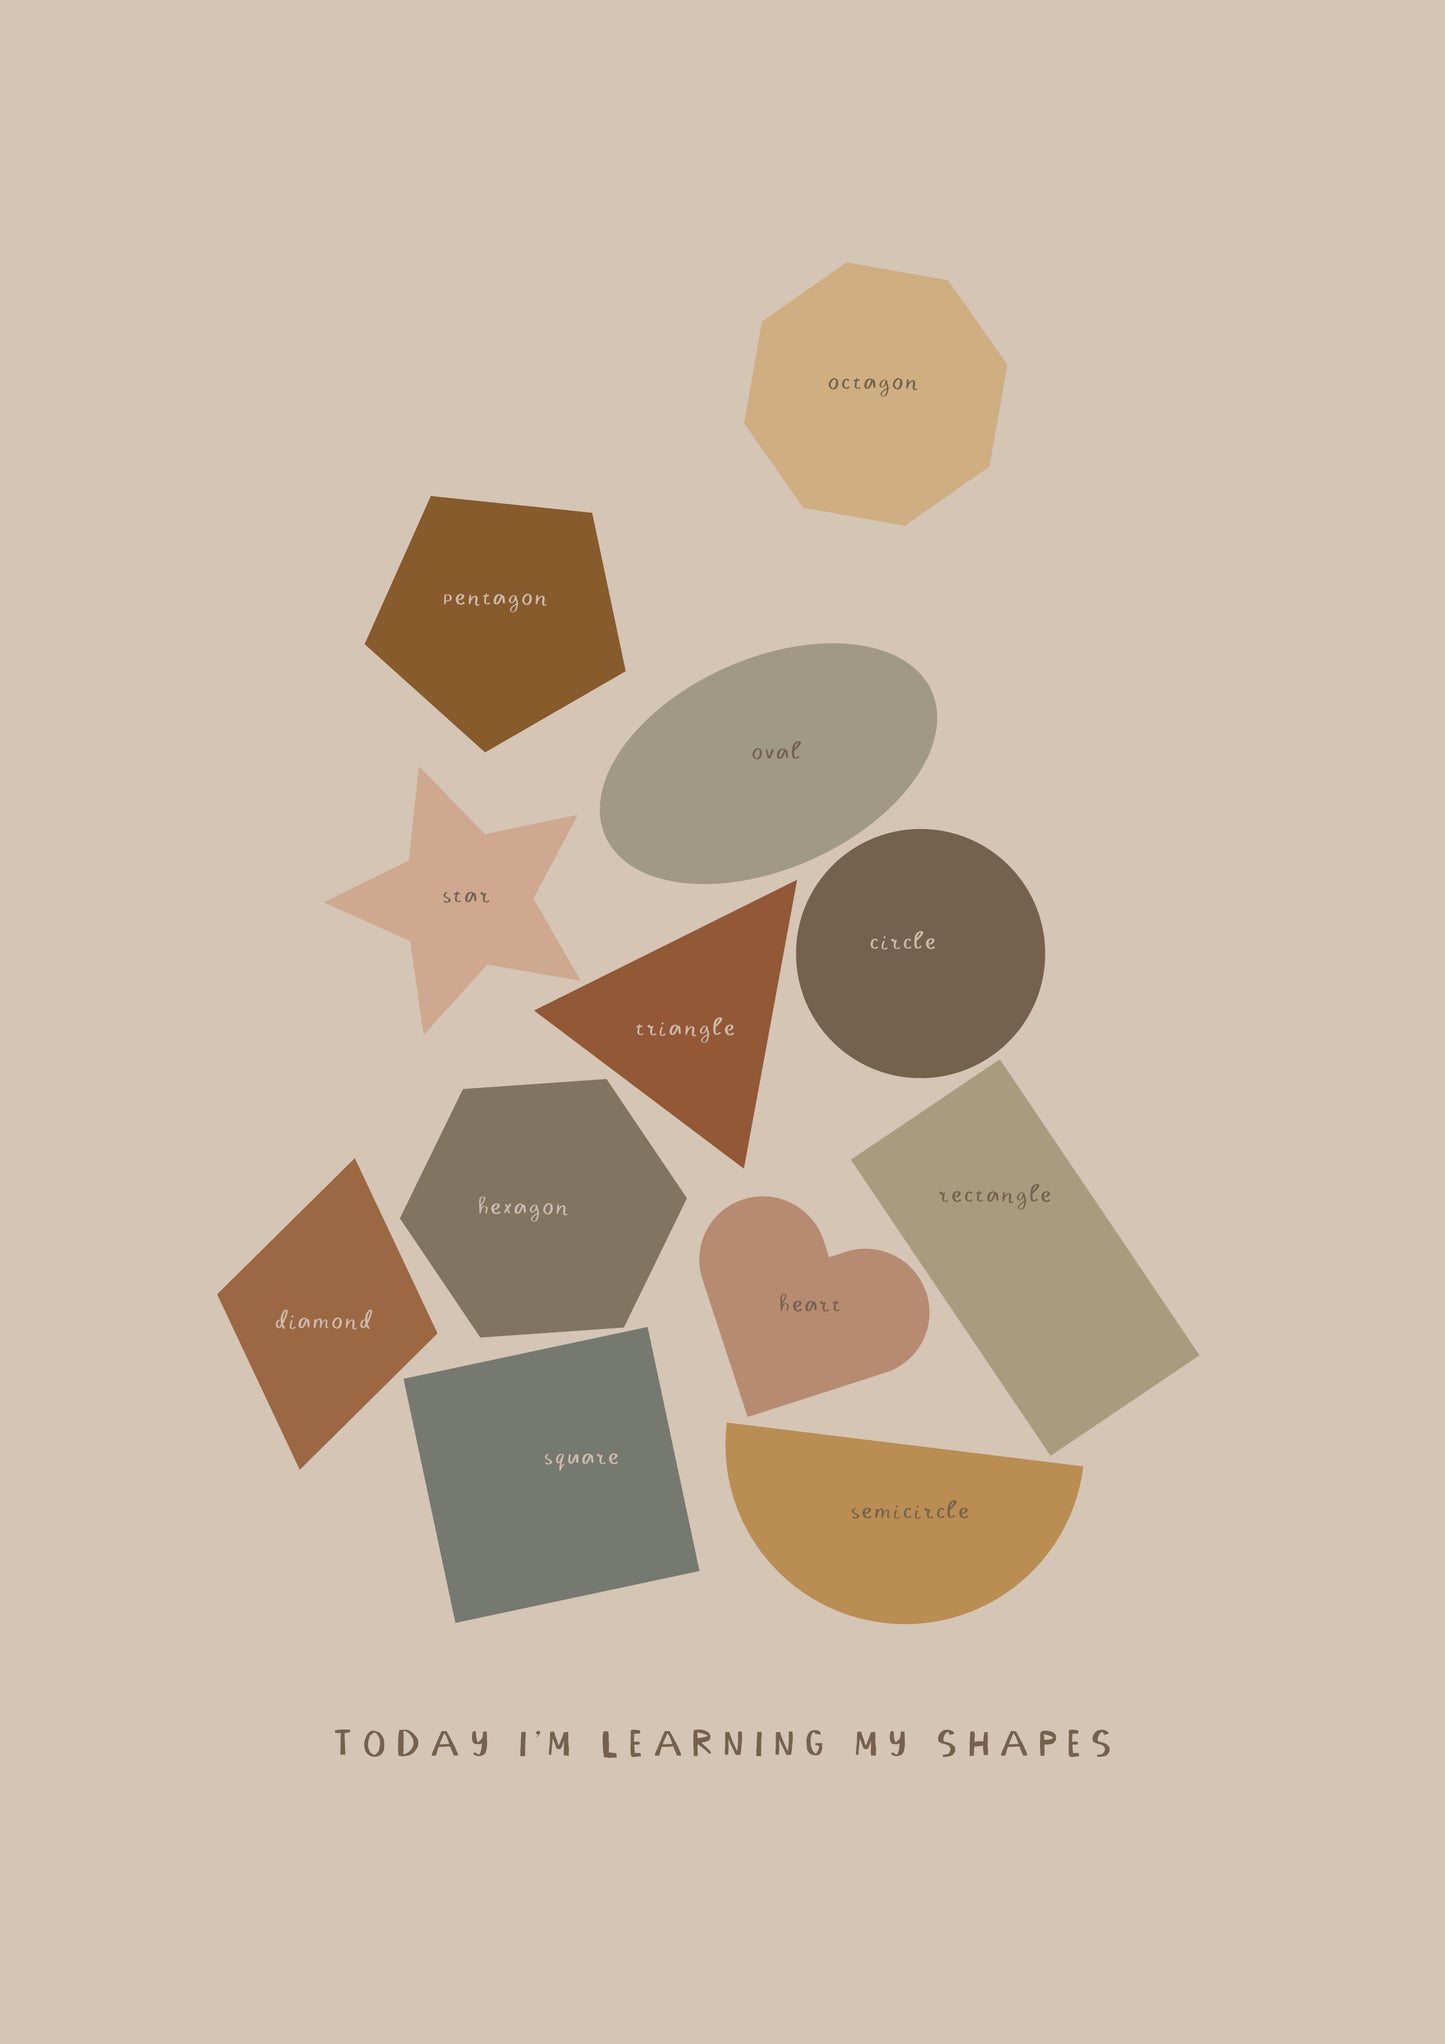 Today I'm Learning My Shapes, Educational Kids Art Print